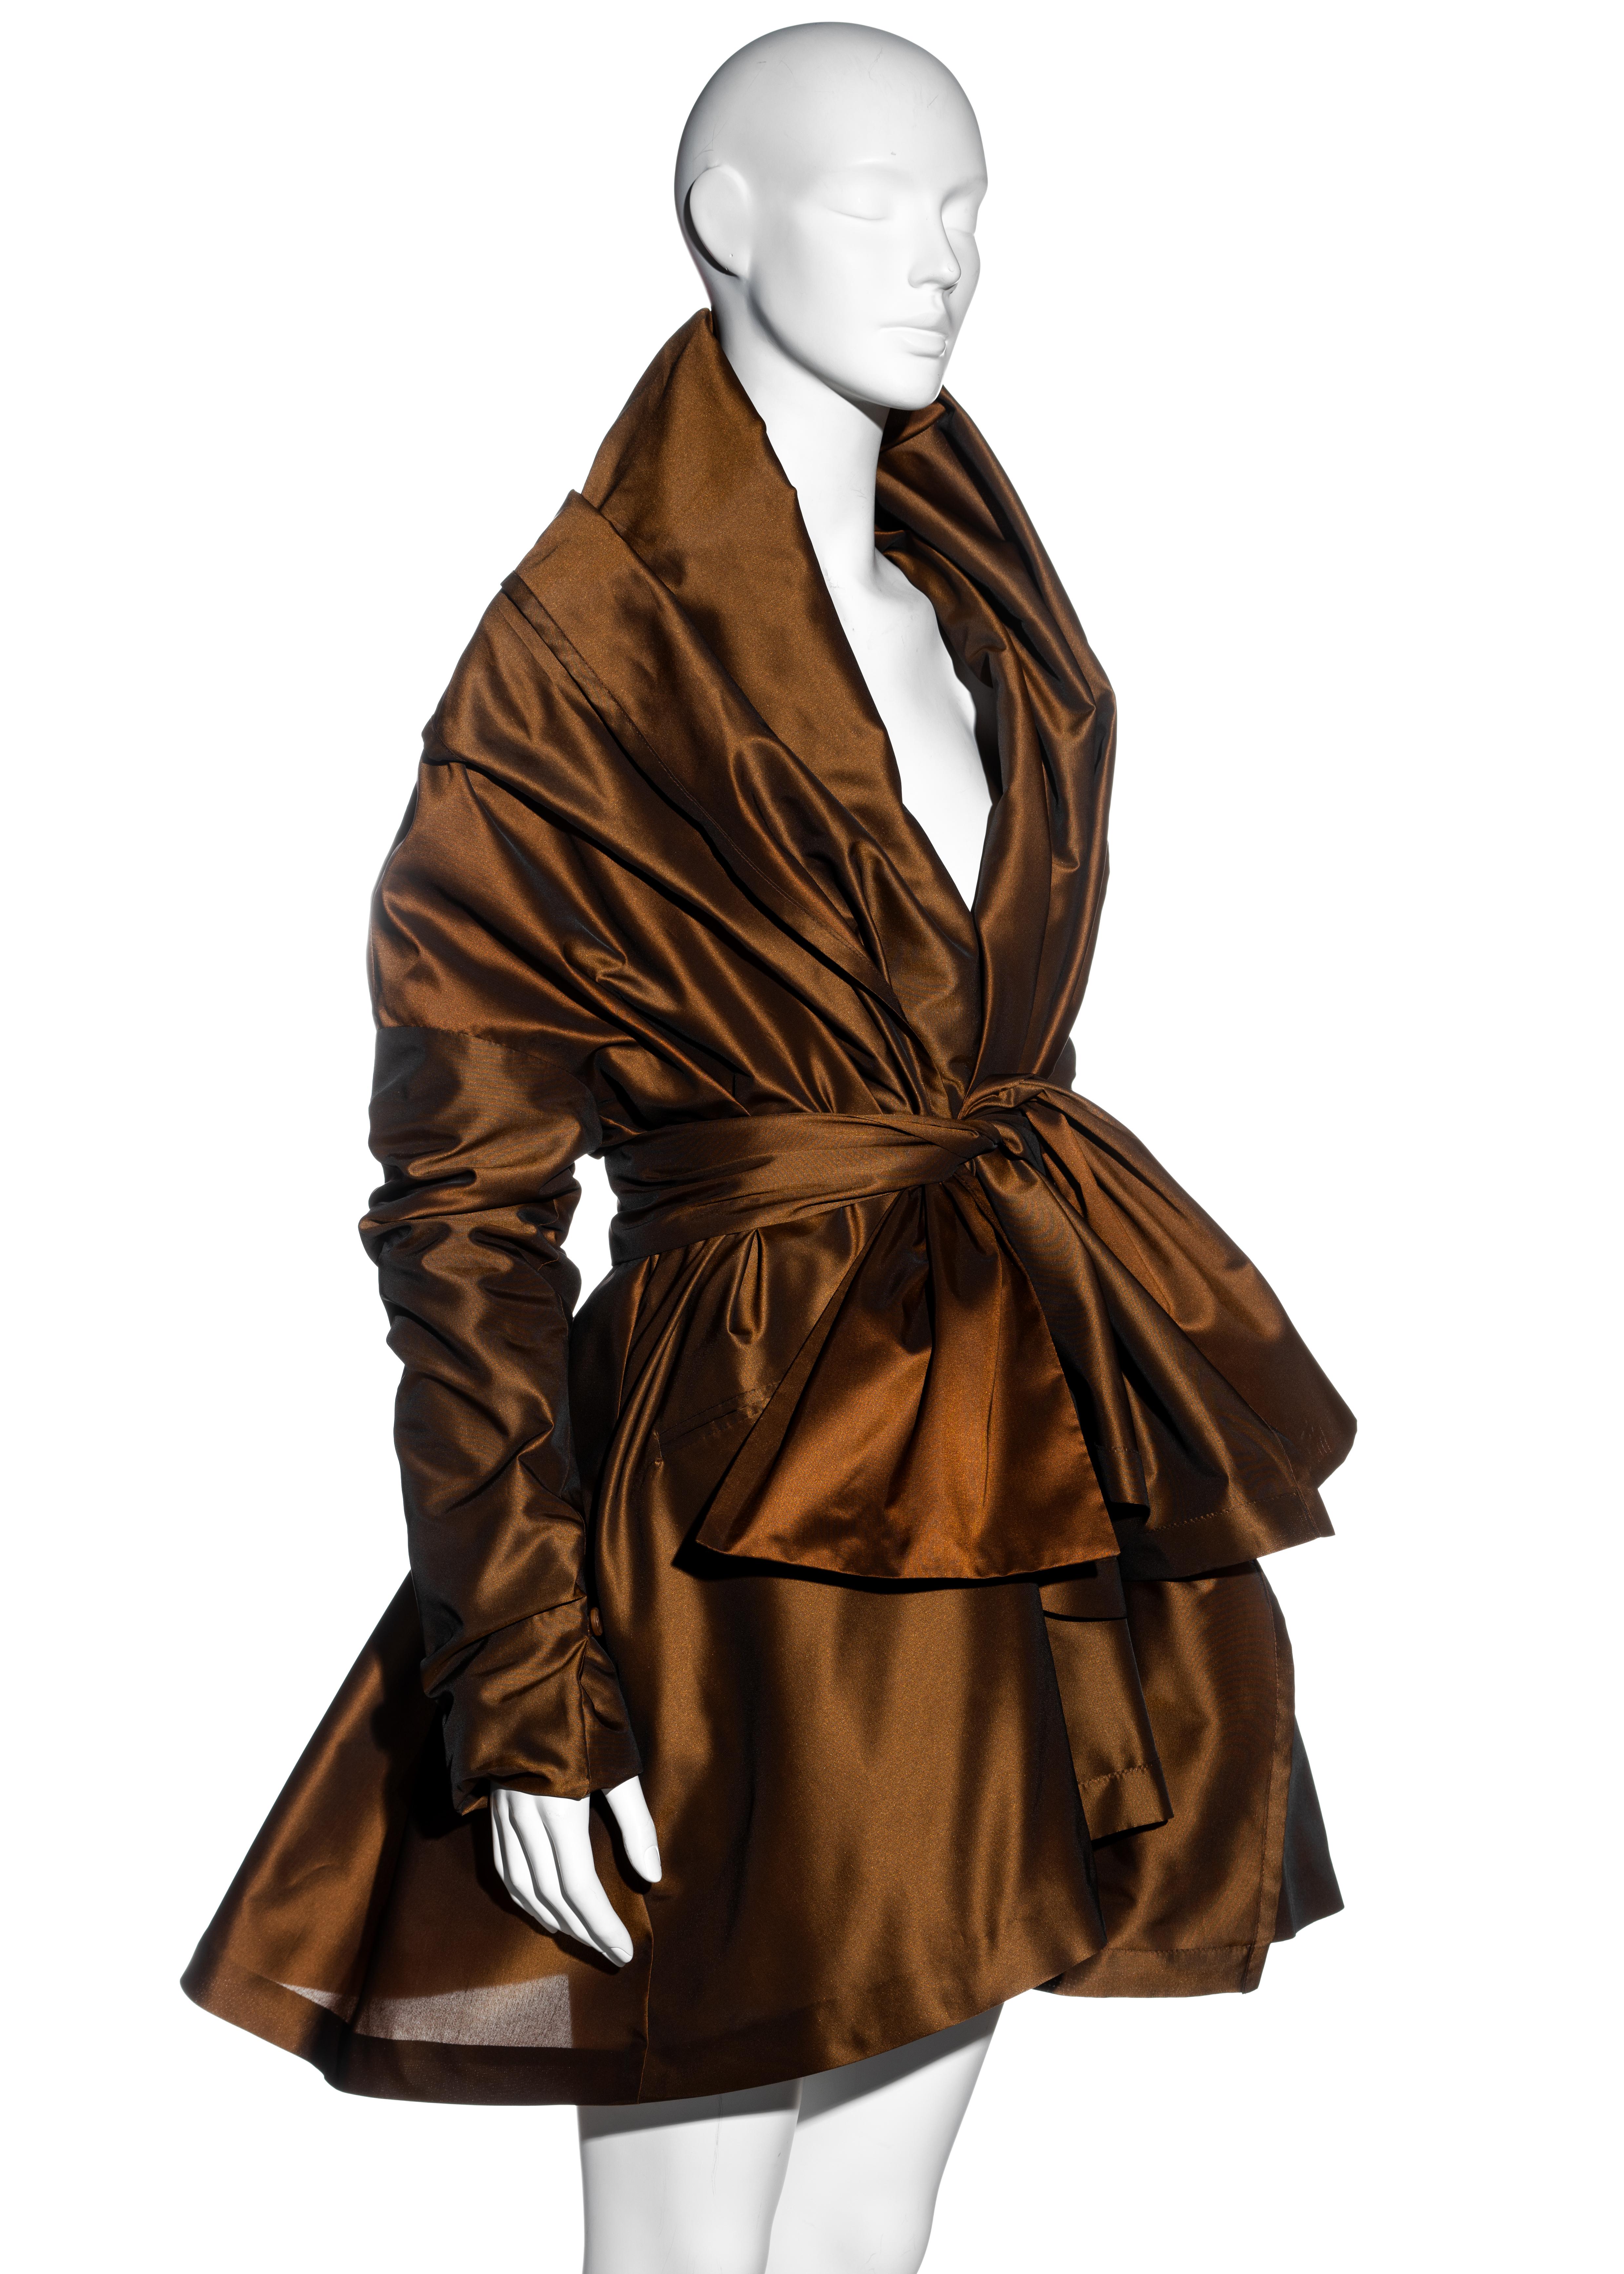 ▪ Dolce & Gabbana copper taffeta evening coat dress
▪ Voluminous shape 
▪ Constructed with two-layered coats attached at the sleeves 
▪ Full structured skirt 
▪ Matching belt accentuating the waist
▪ A Large collar which can be styled off-shoulder